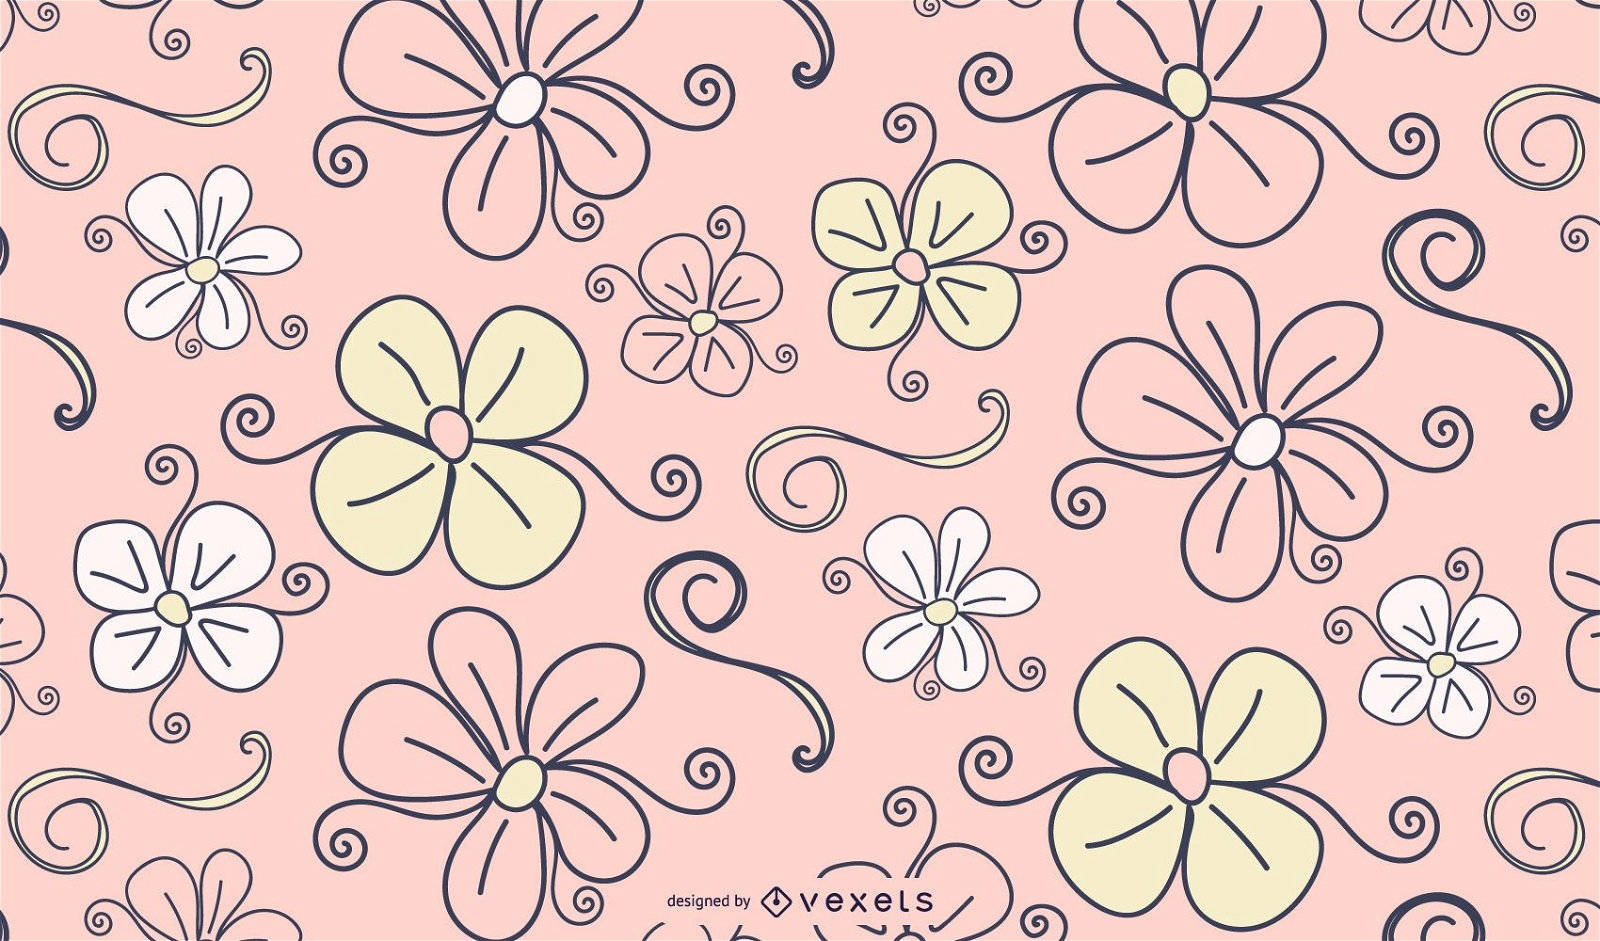 Flowers and swirls background in pink